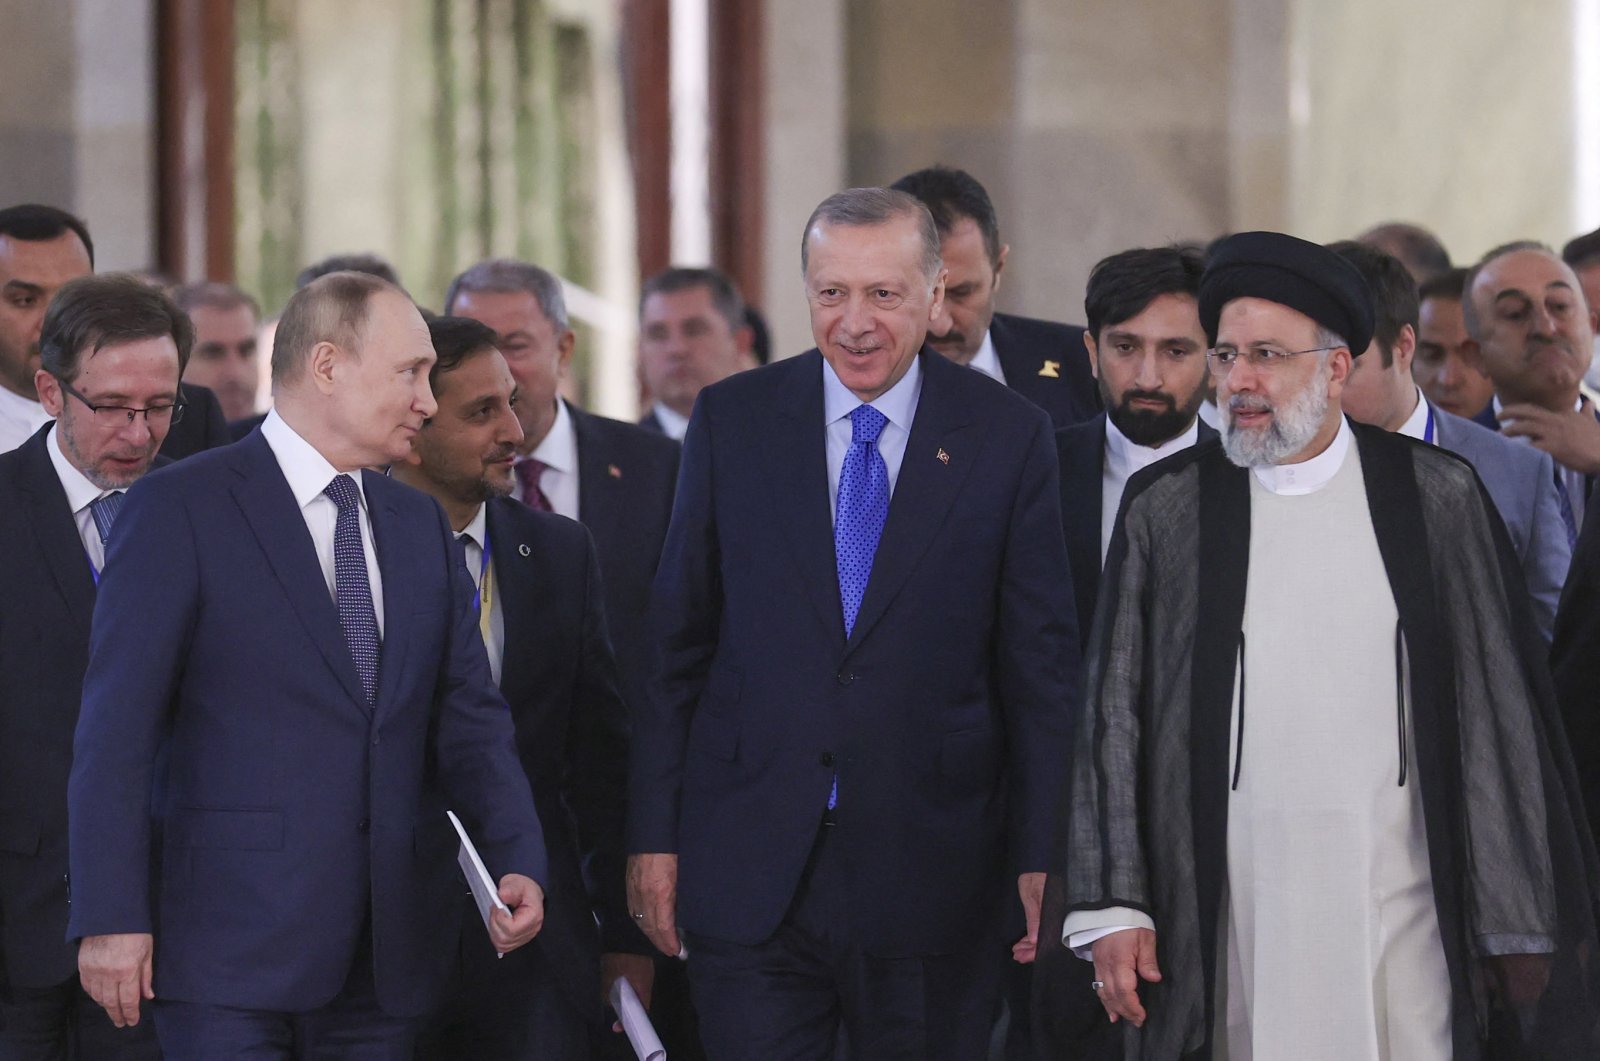 President Recep Tayyip Erdoğan (C), Iranian President Ebrahim Raisi (R) and Russian President Vladimir Putin (L) arriving for a joint news conference after the end of the Astana Trilateral Summit at the Tehran International Conference Hall in Tehran, Iran, July 19, 2022. (AFP Photo)